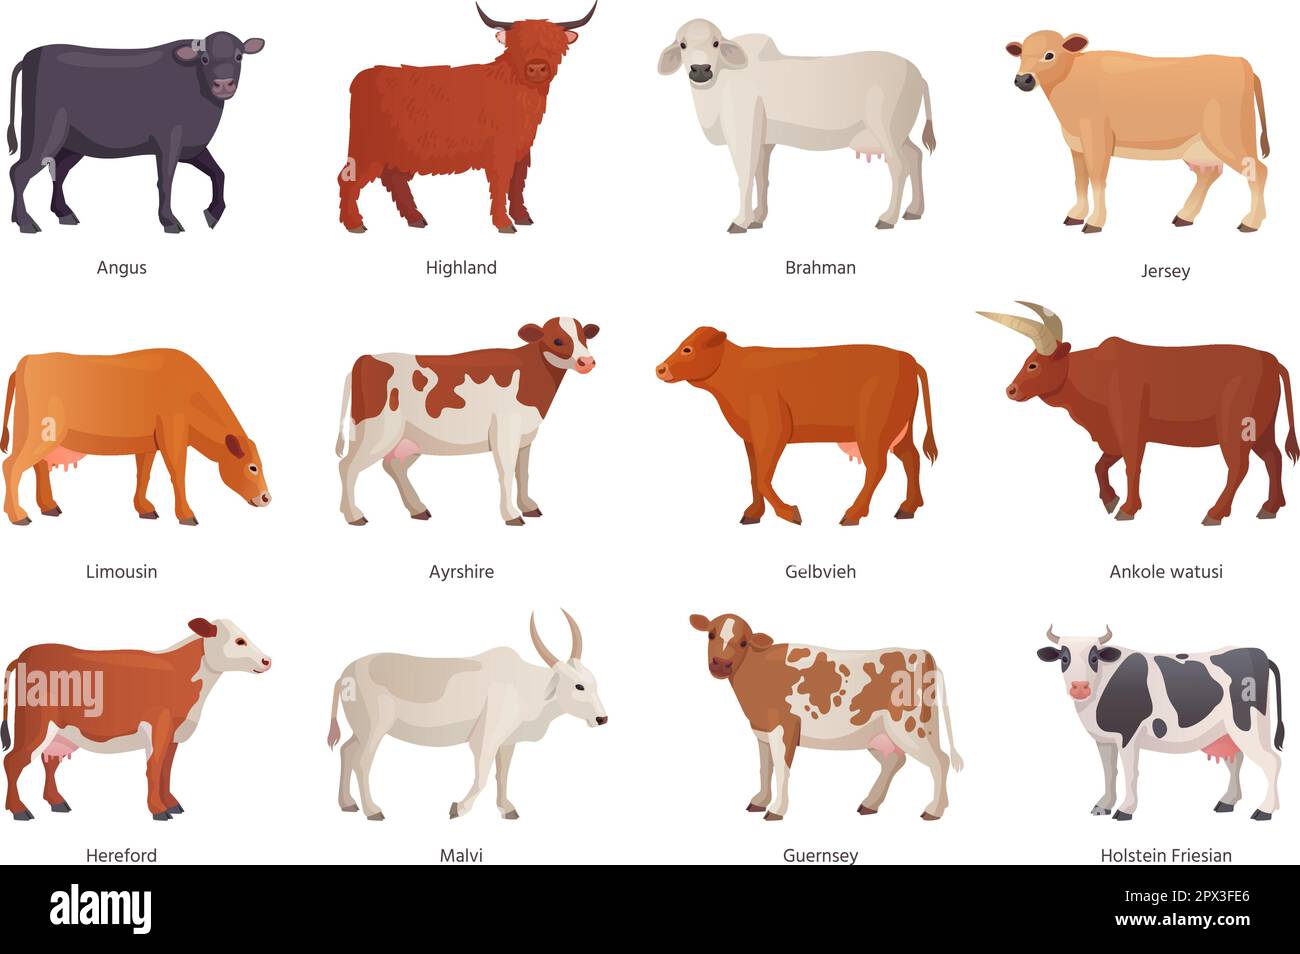 Breeding cattle. Breeds cattles farm mammal animal, netherlands cow beef, agriculture breed bull brahman hereford angus ayrshire limousin, set ingenious vector illustration of farm cattle domestic Stock Vector